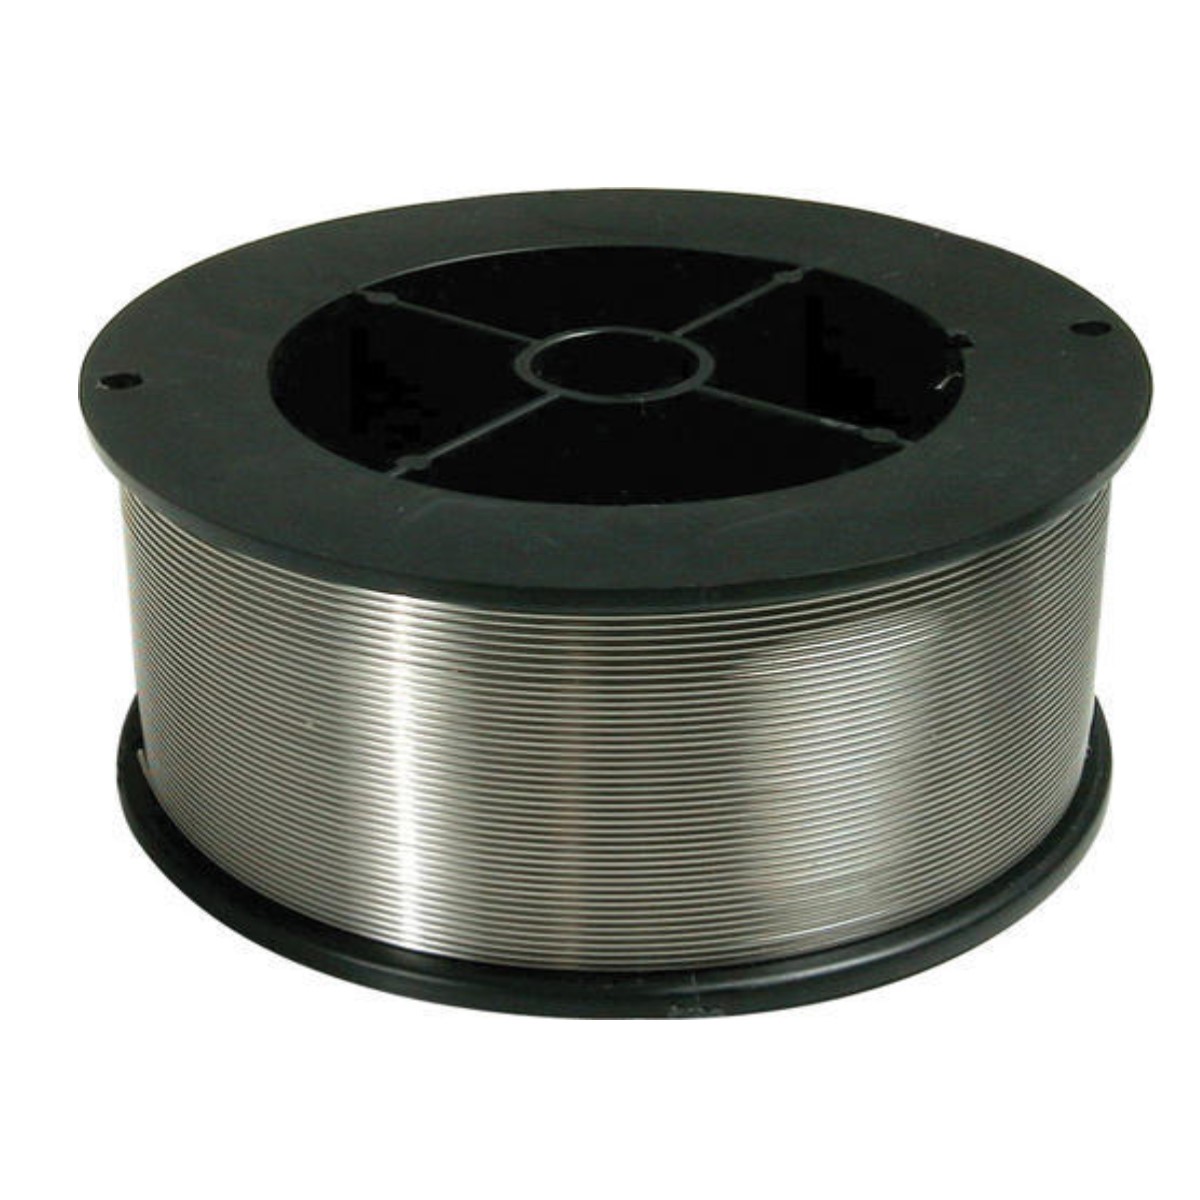 welding product - Mig 308L SS wire